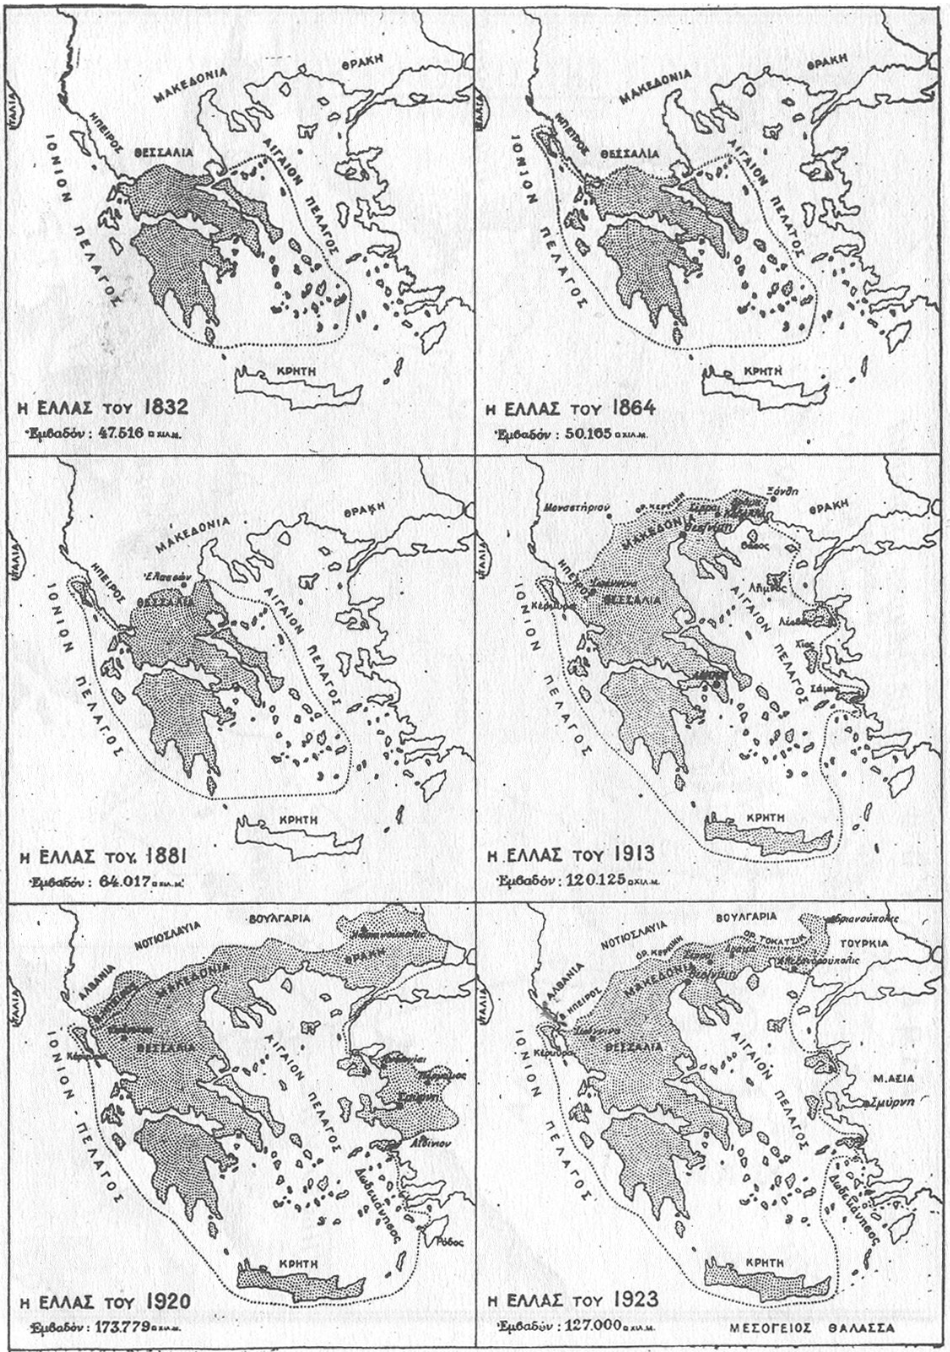 Figure 1: Expansion of the Greek Territory (1832-1923). The annexation of the “New Lands” took place between 1912 and 1923. Source: Yannis Milios, Ο Ελληνικός Κοινωνικός Σχηματισμός: Από τον Επεκτατισμό στην Καπιταλιστική Ανάπτυξη [The Greek Social Formation: From Expansionism to Capitalist Development] (Athens: Kritiki, 2000), 389.